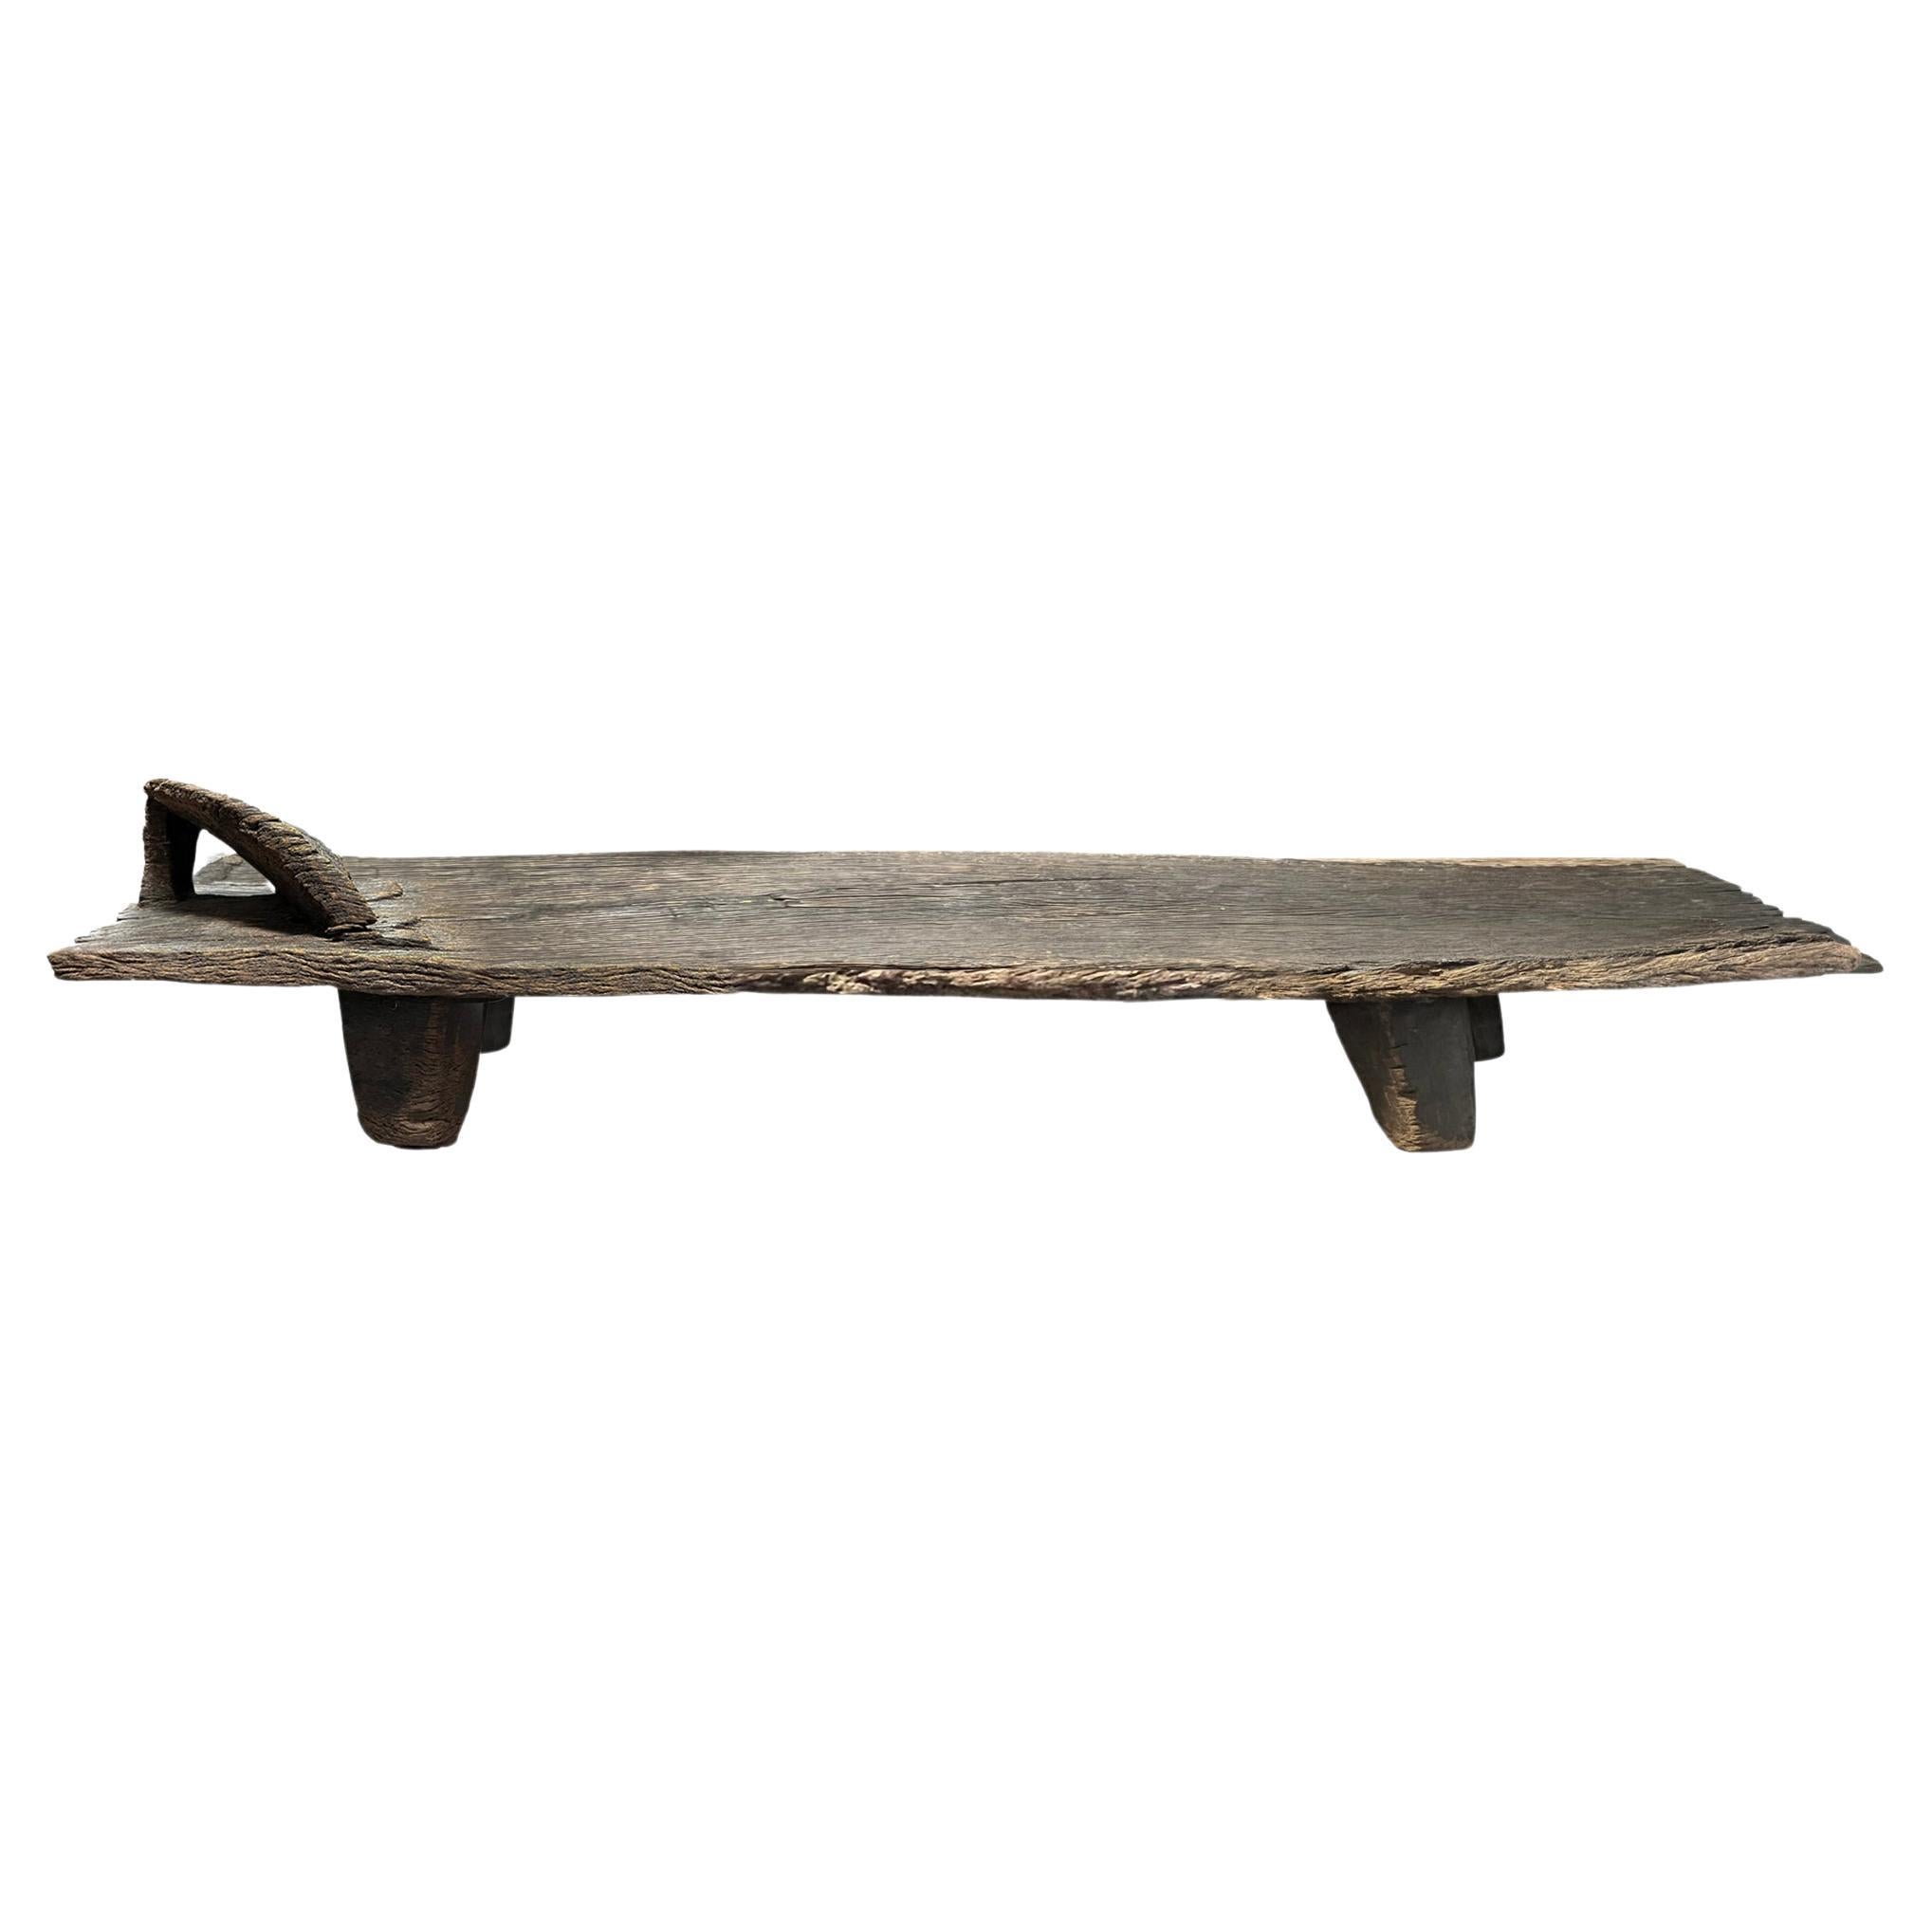 Exceptional Early 20th Century Senufo Low Table